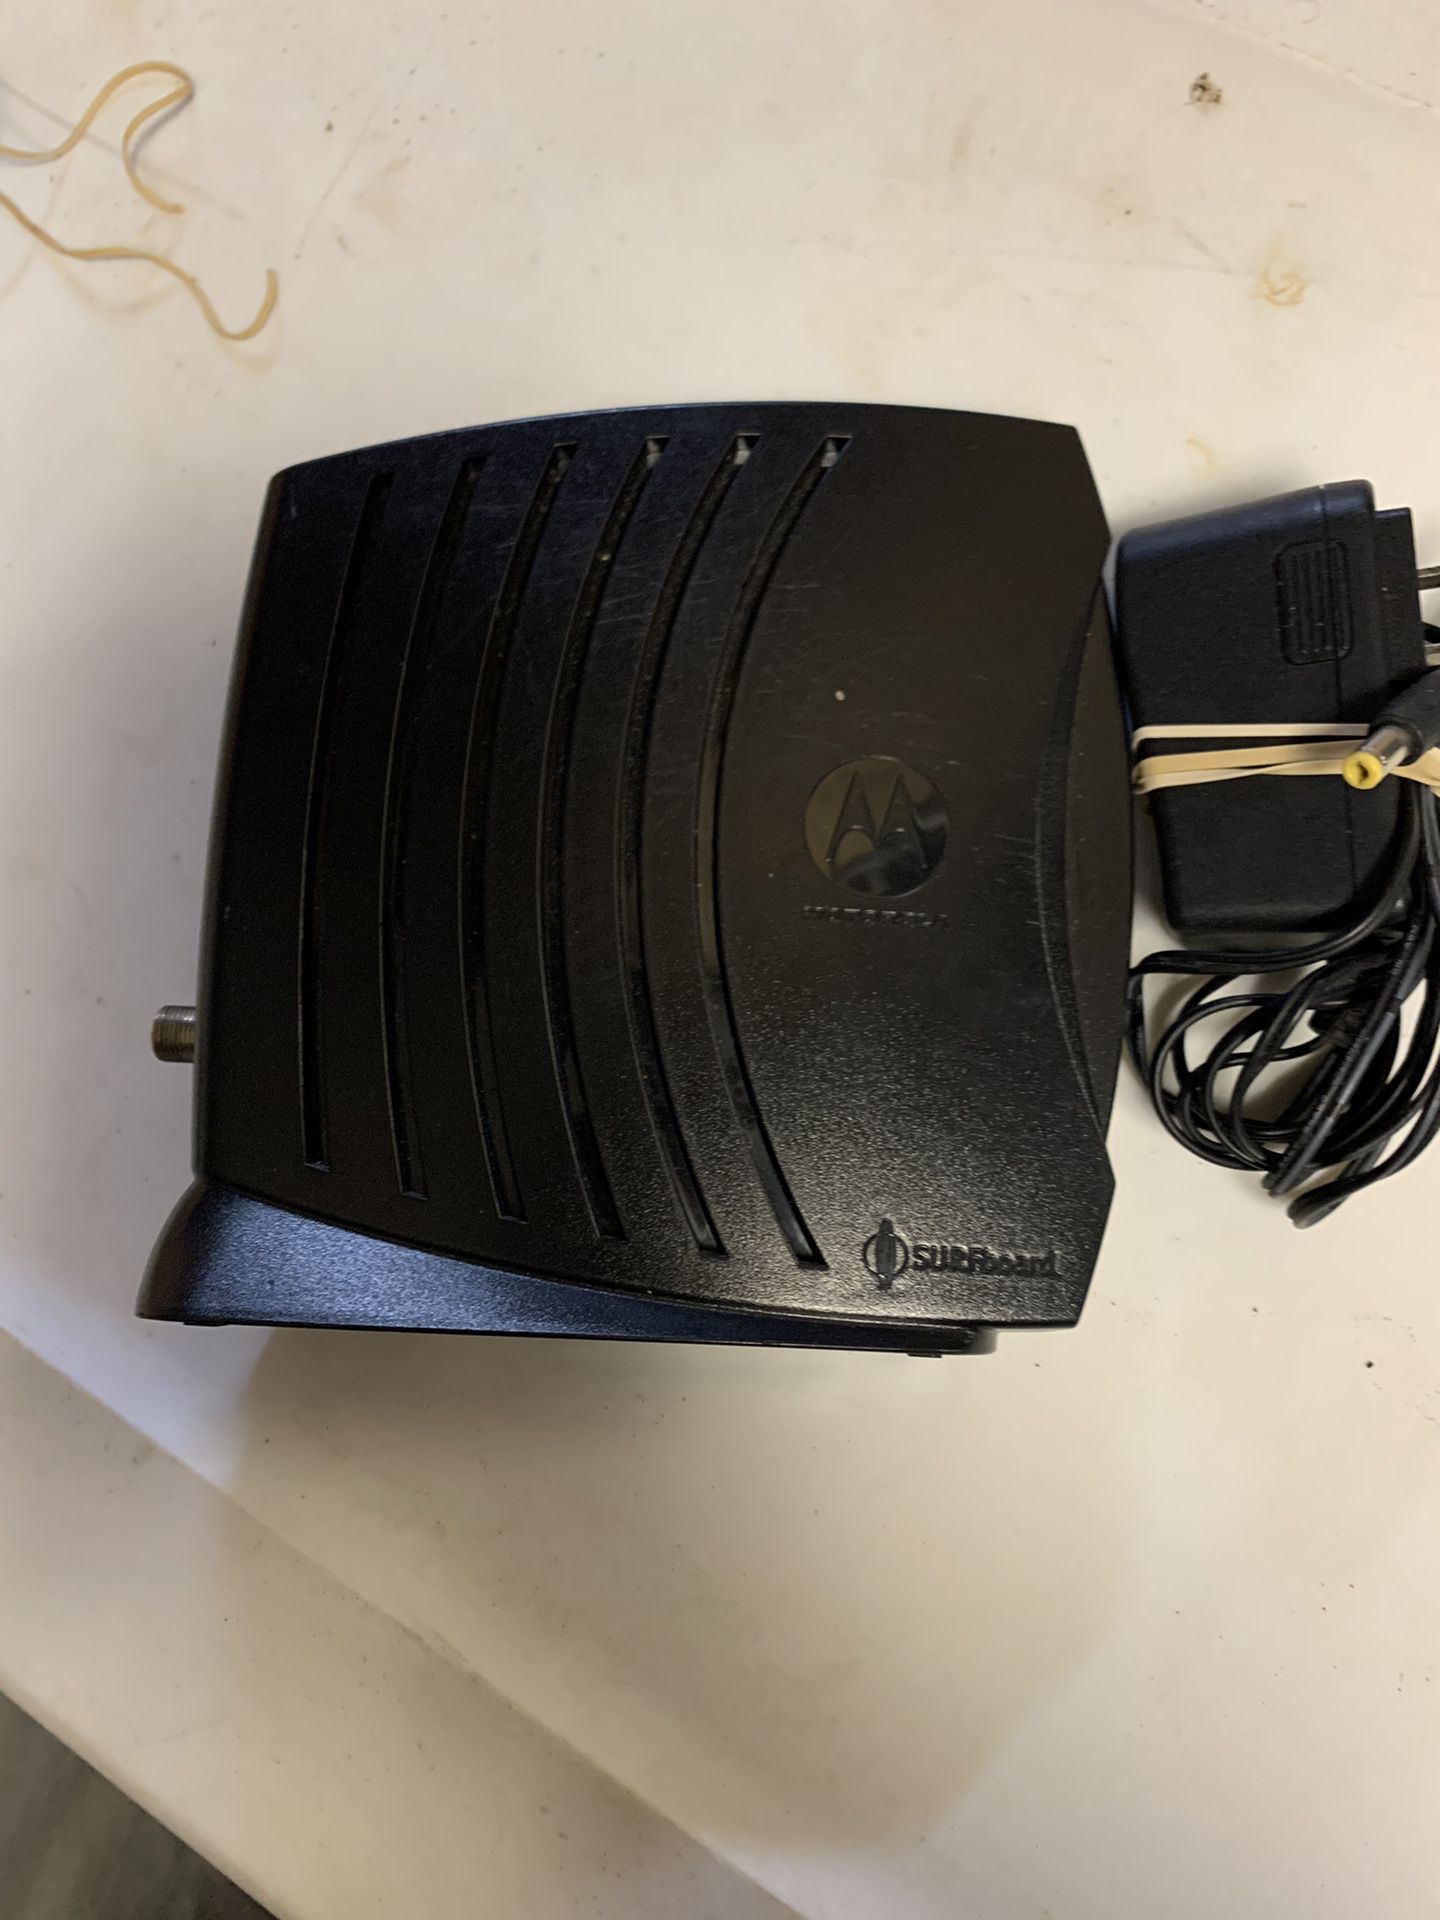 Motorola Surfboard Cable Modem SB5101 With AC Power Adapter 